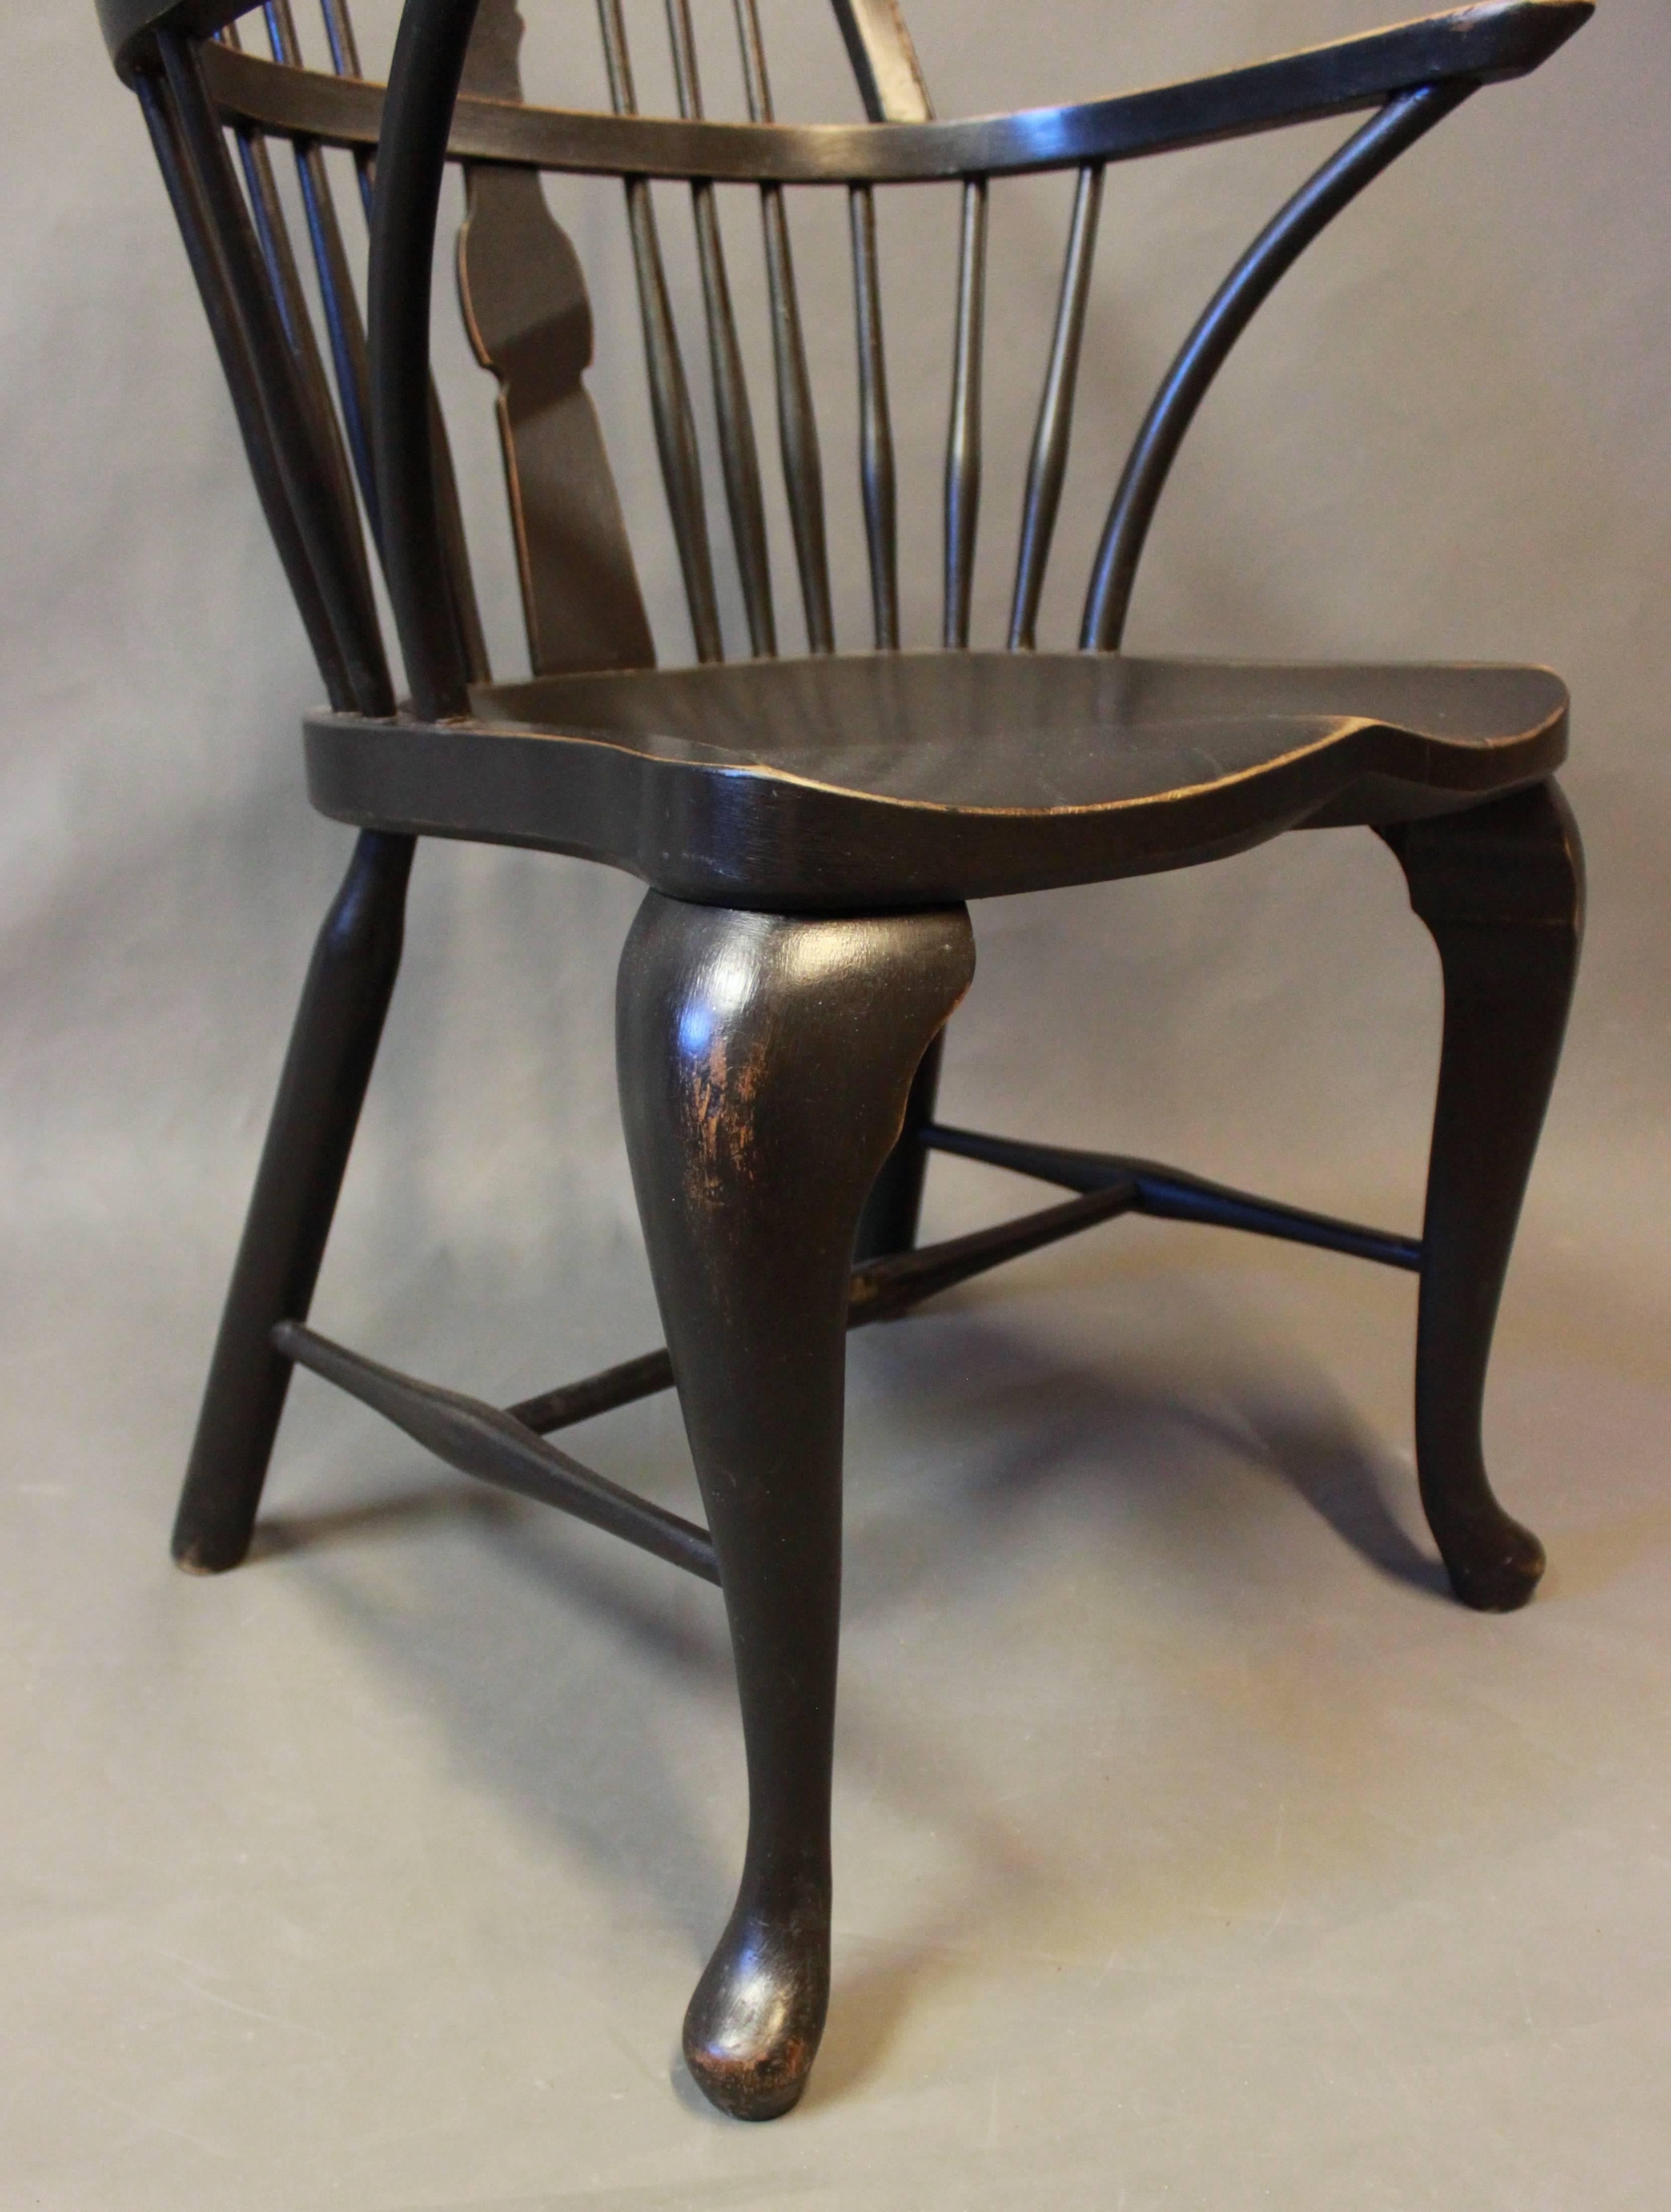 Black painted Windsor armchair in wood from the 1880s. The chairs are in great vintage condition.